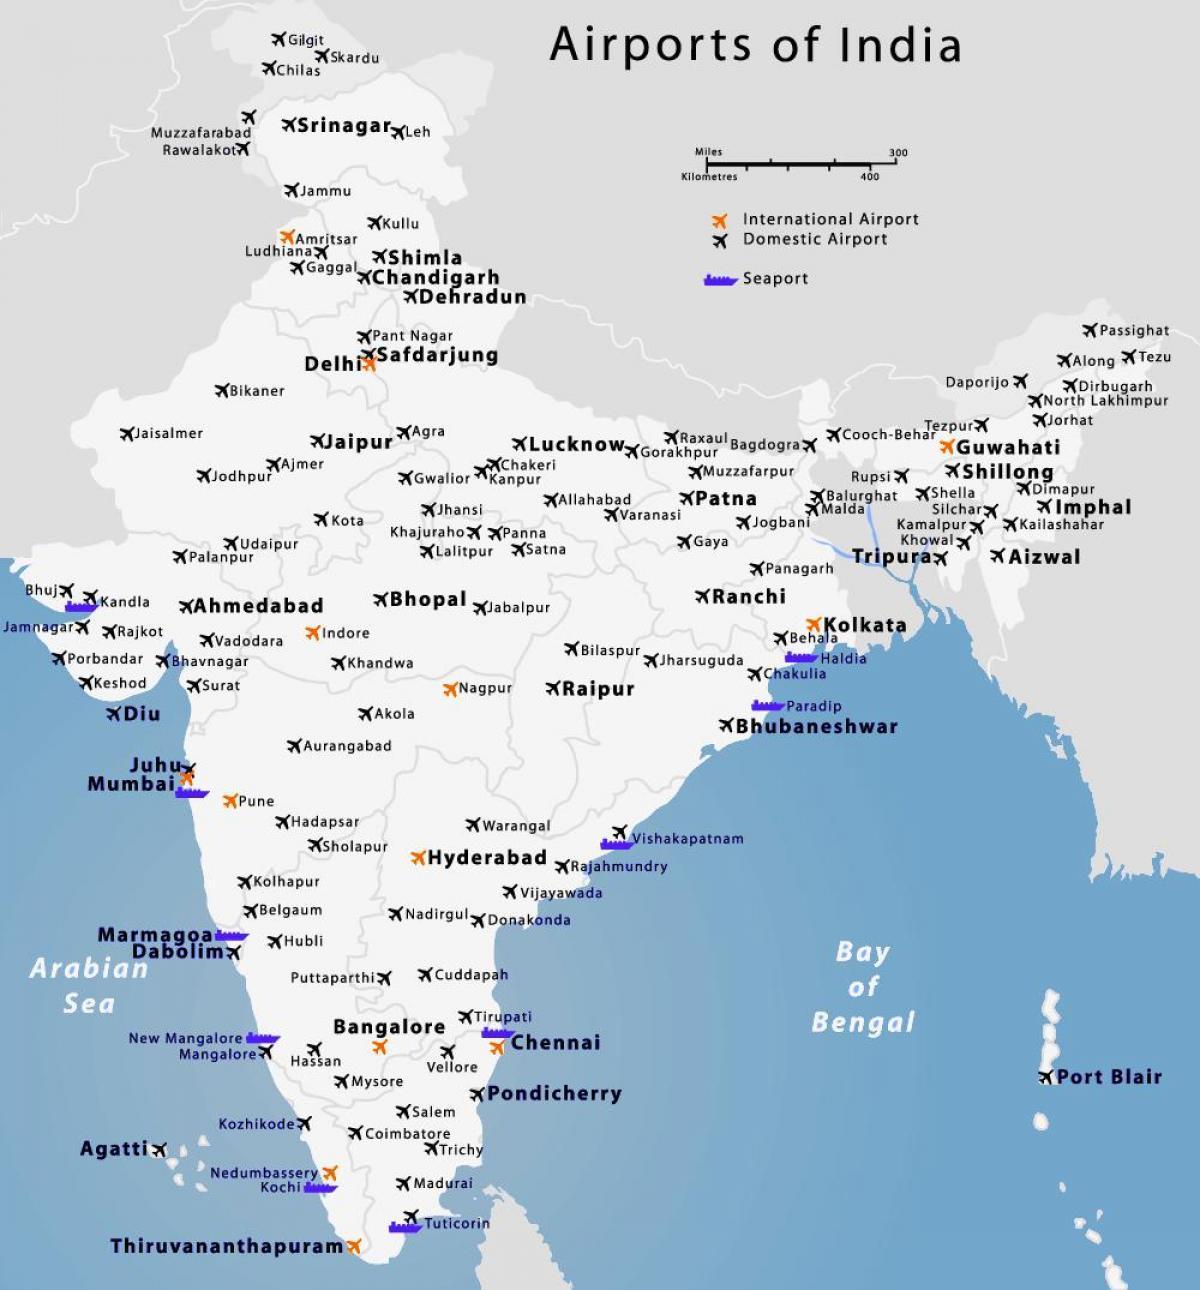 Map of India airports